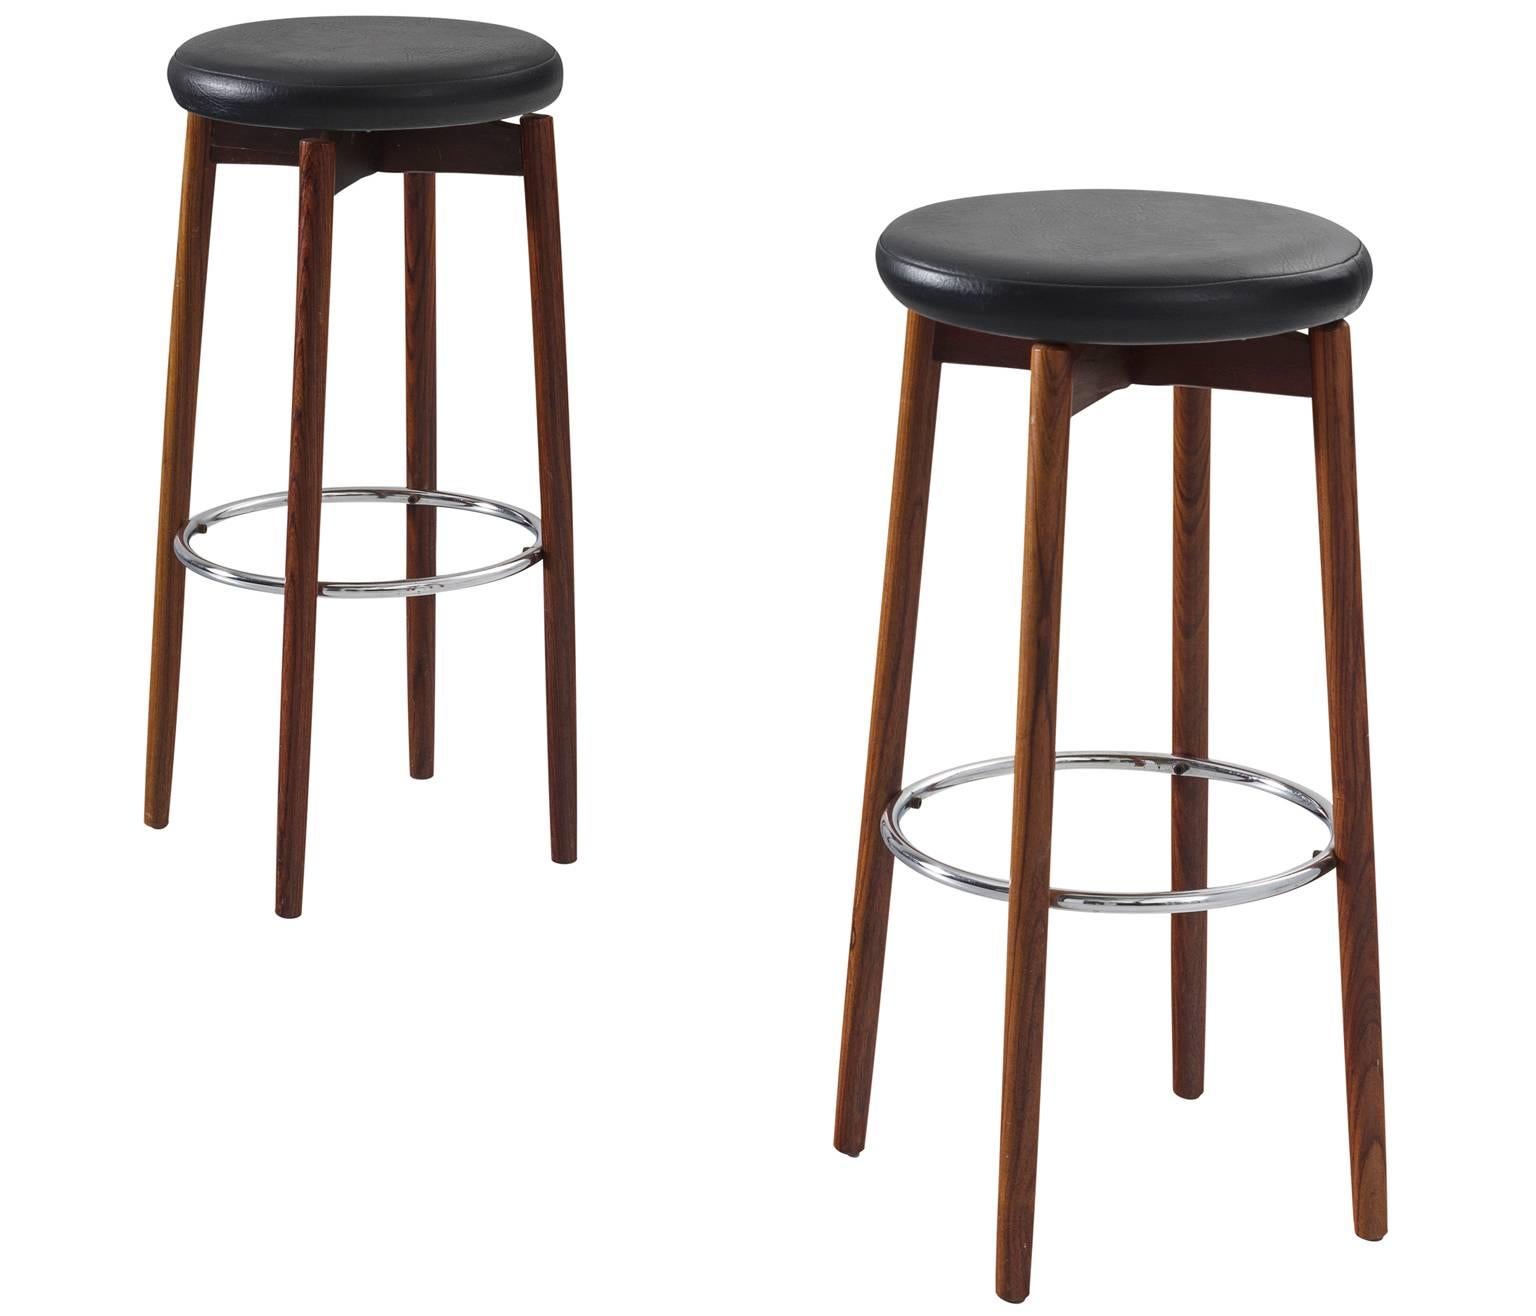 Barstools, leather metal and rosewood, 1970s, Europe.

This strong set of two bar stools is very solid in appearance. The metal ring that connects the four mahogany legs is perfectly mirrored in the black leather seat. The wood that serves as a